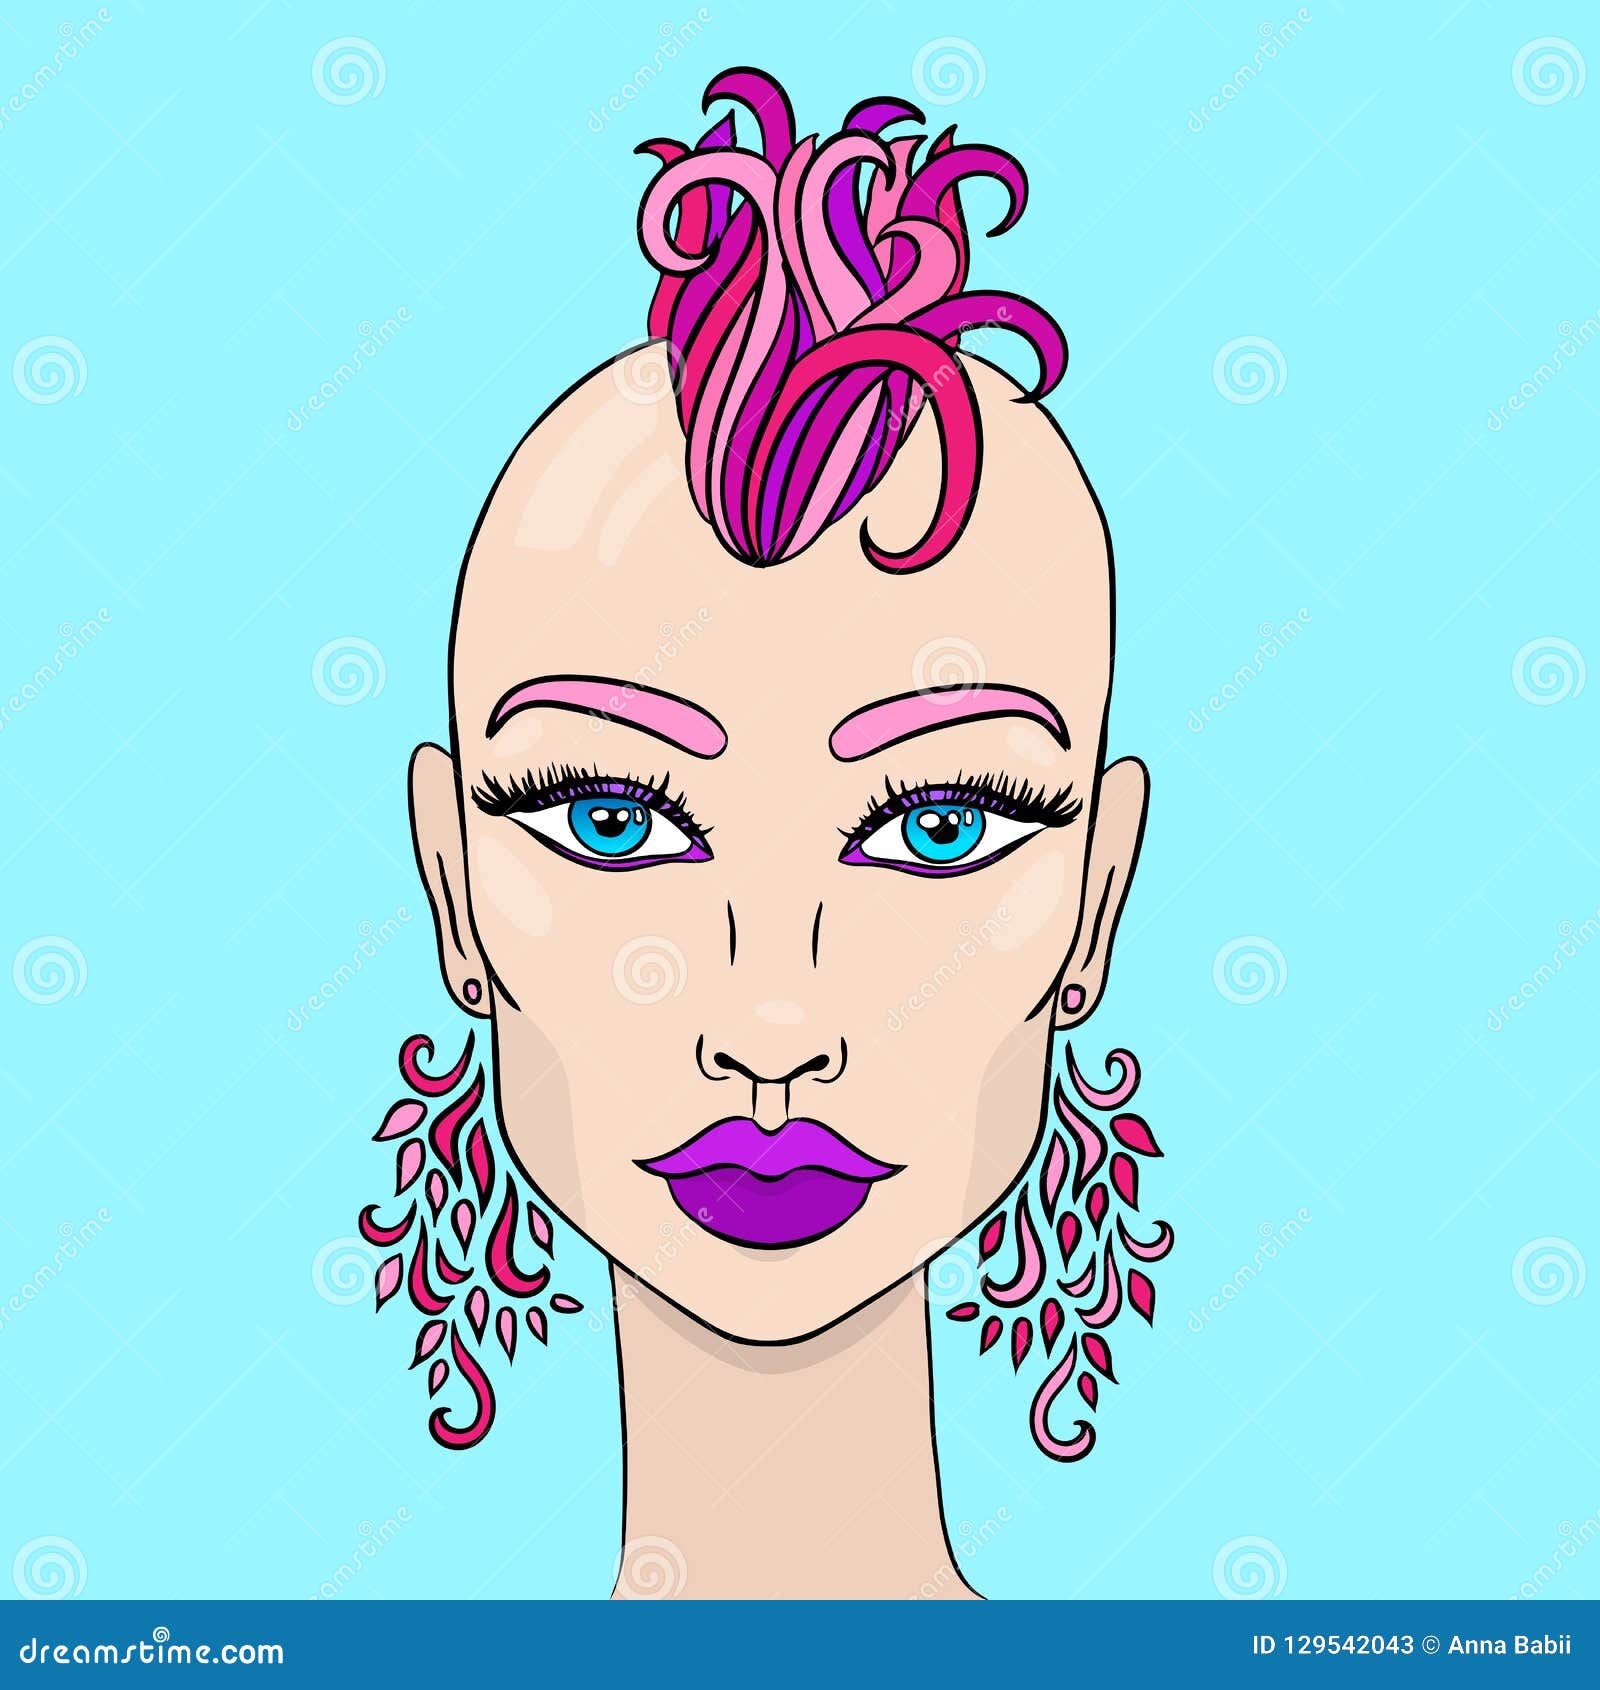 Doodle Girl With Shaved Head And Earrings. 